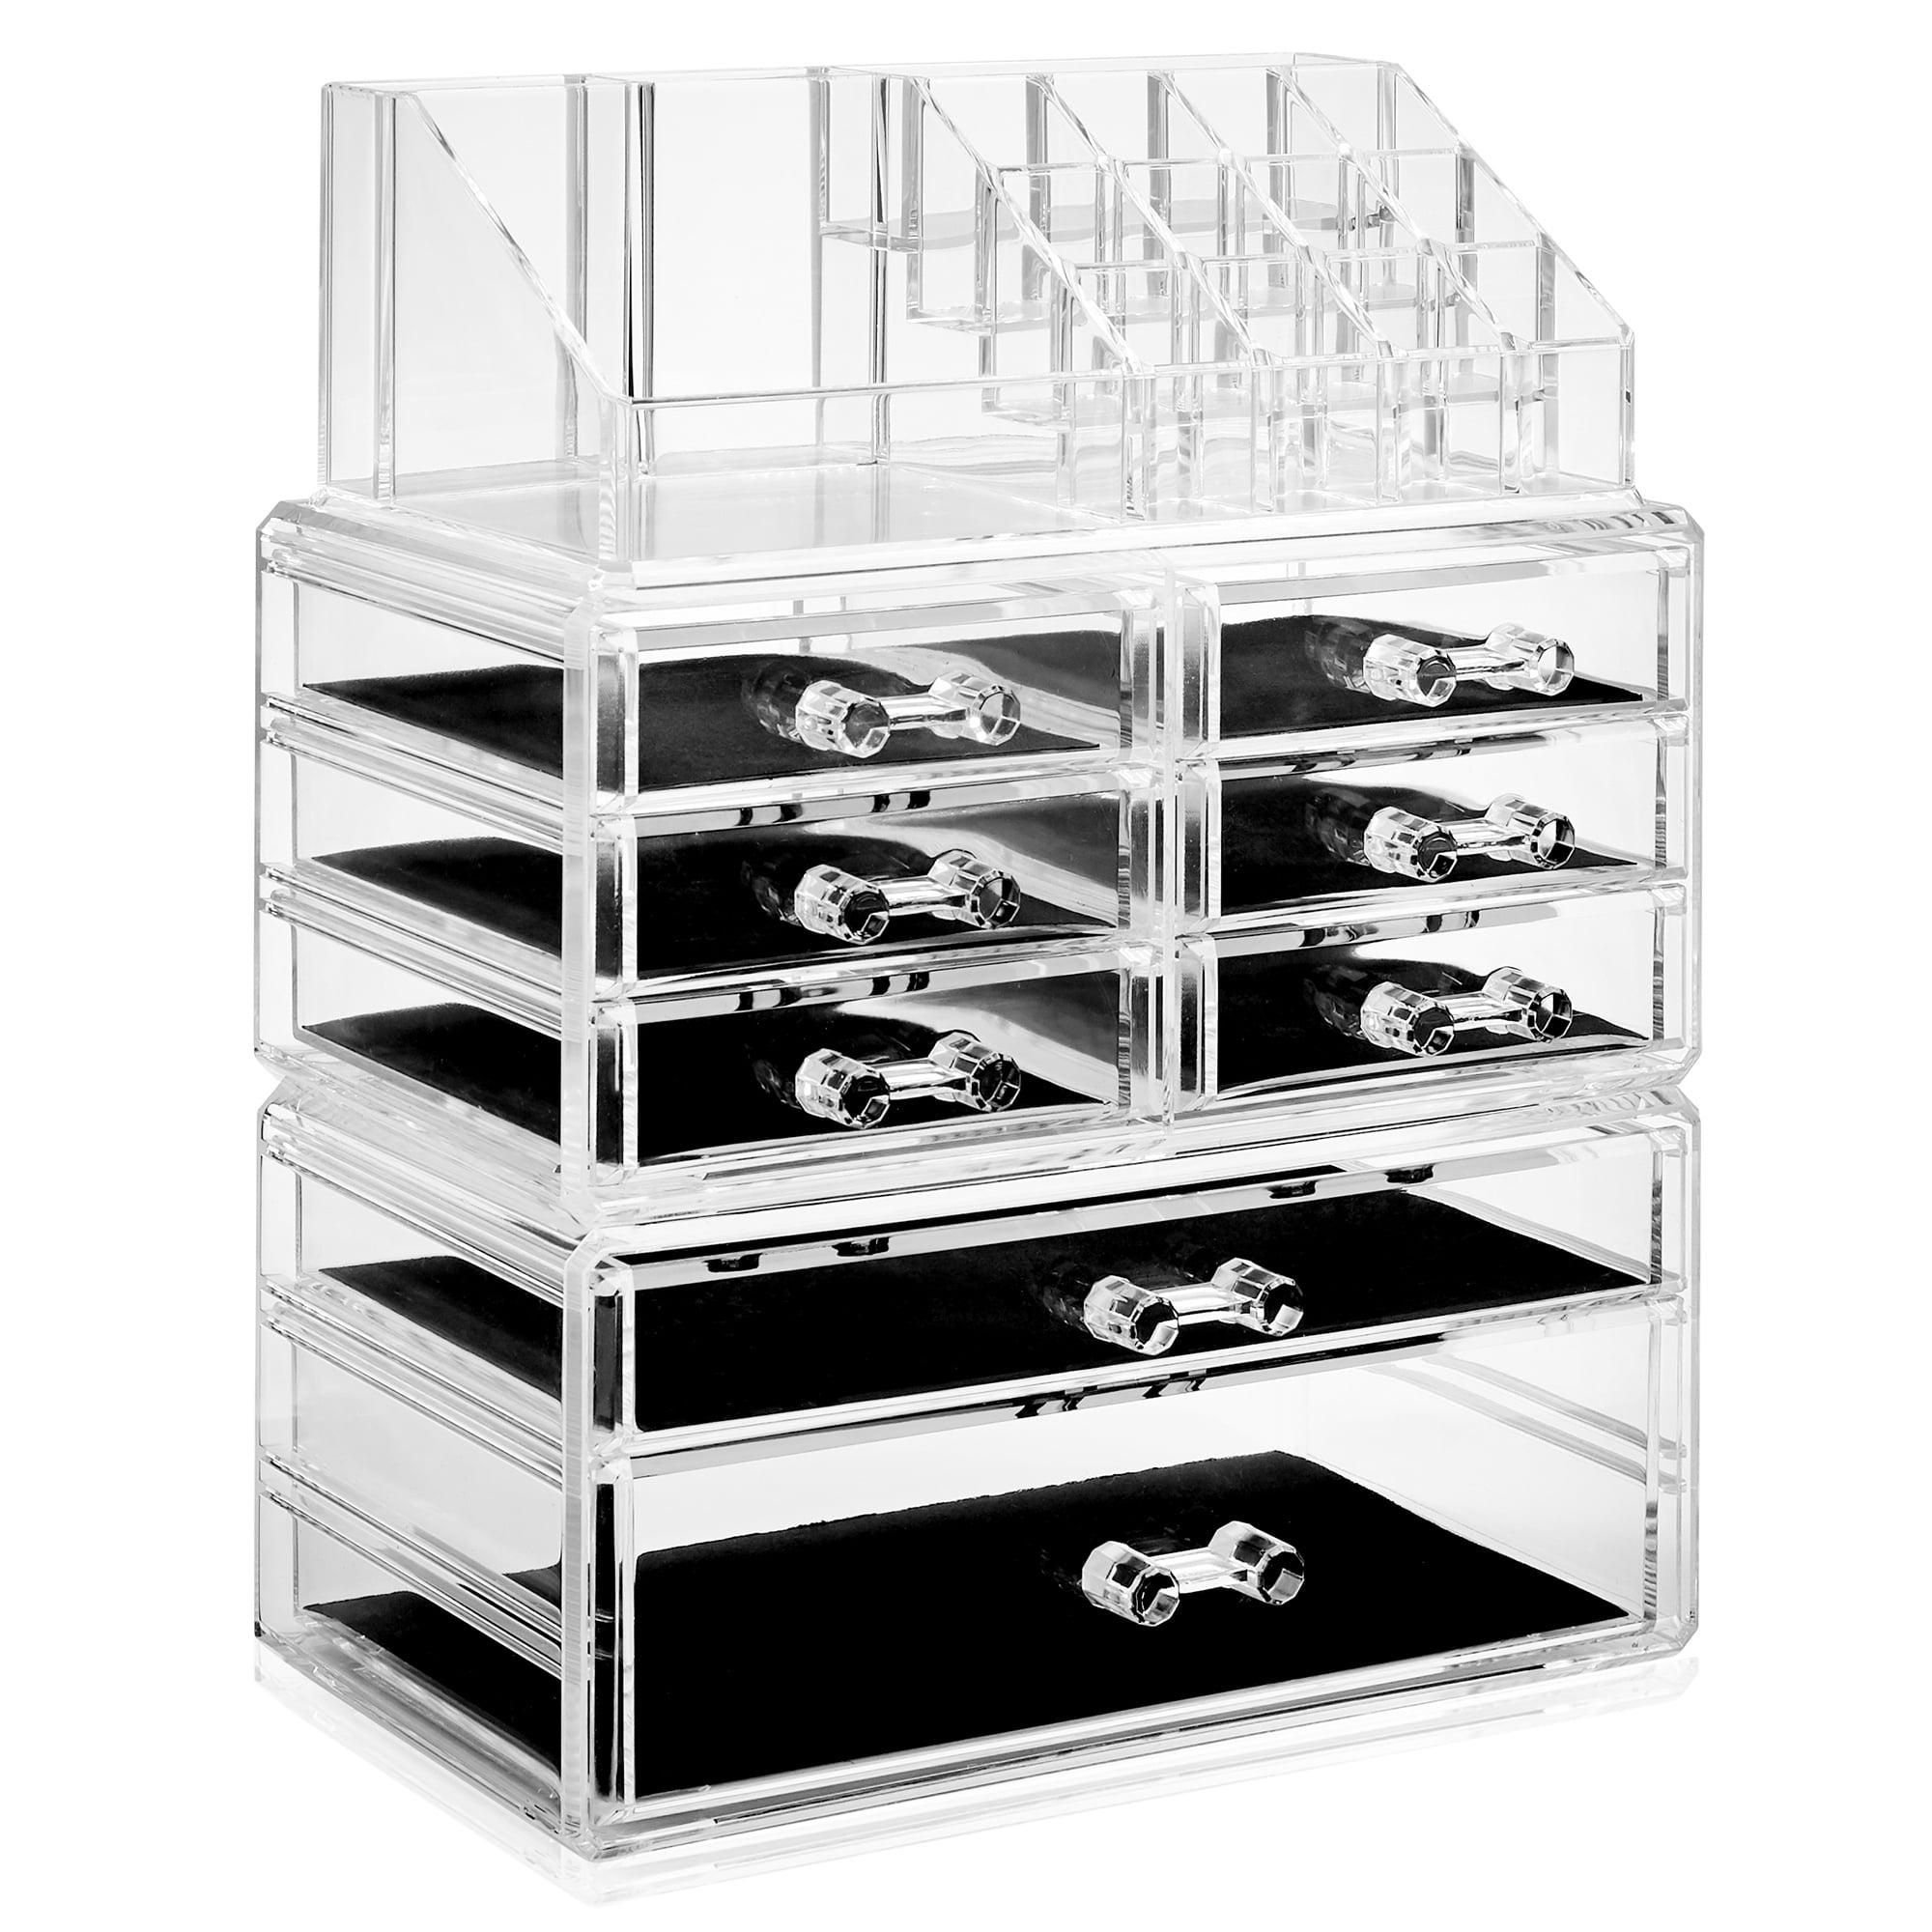 Makeup Storage Makeup Organizer Portable Acrylic Cosmetic Storage Box,  Transparent Drawers Jewelry Box Cosmetic Holder For Dresser And Bathroom